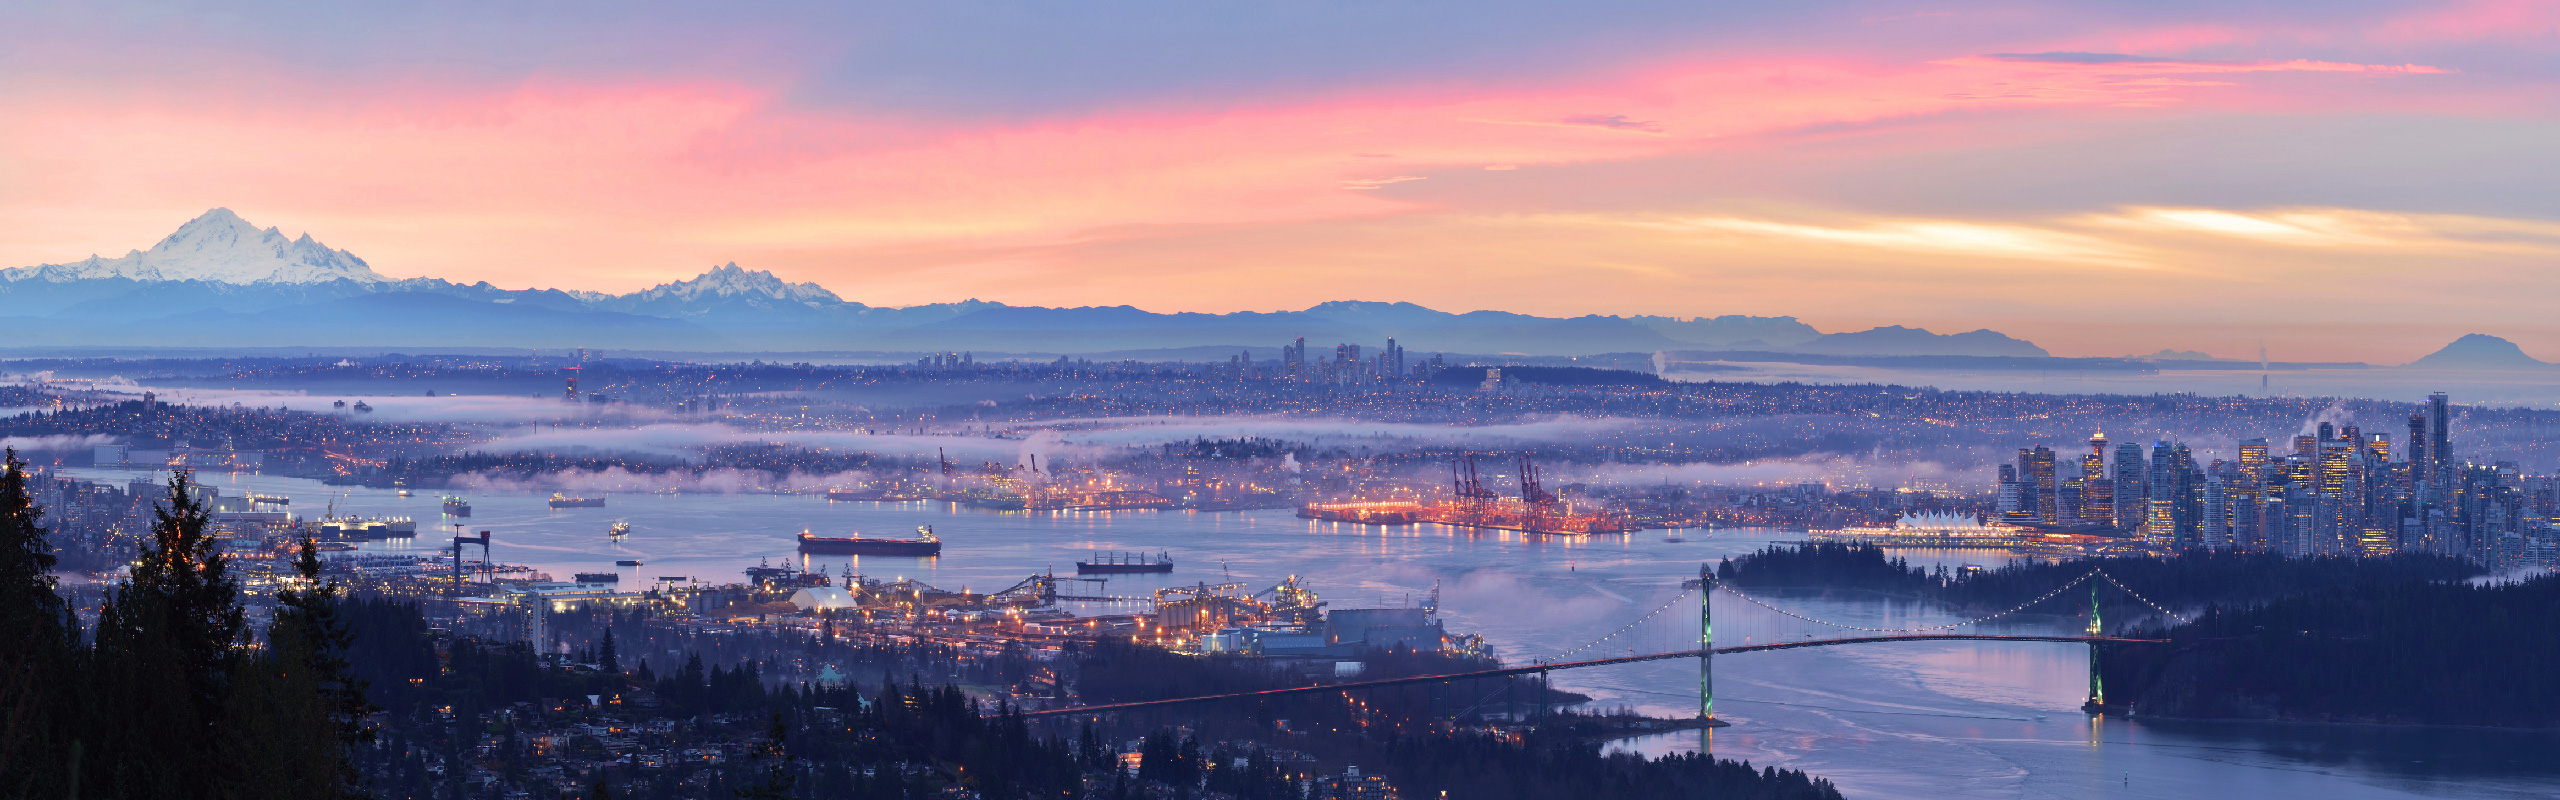 vancouver-sunset